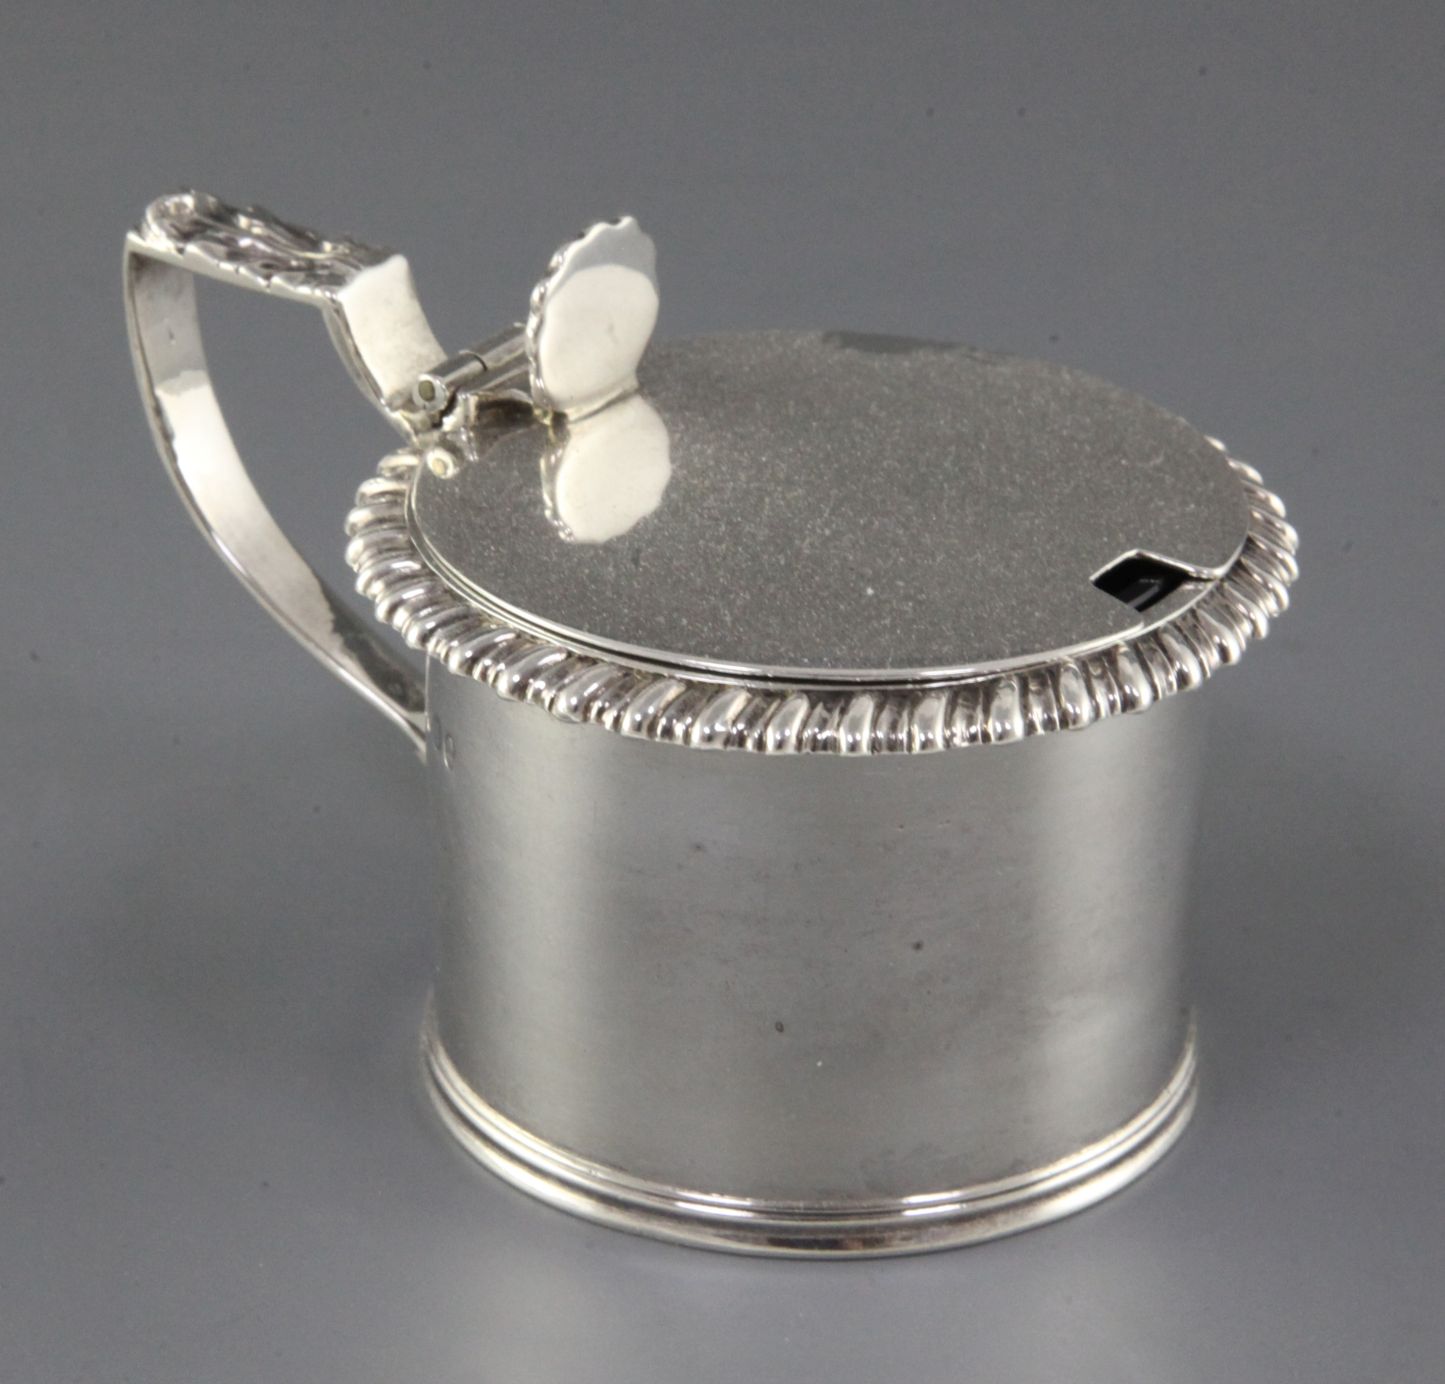 A George IV silver drum mustard by Emes & Barnard, with gadrooned border, shell thumbpiece and